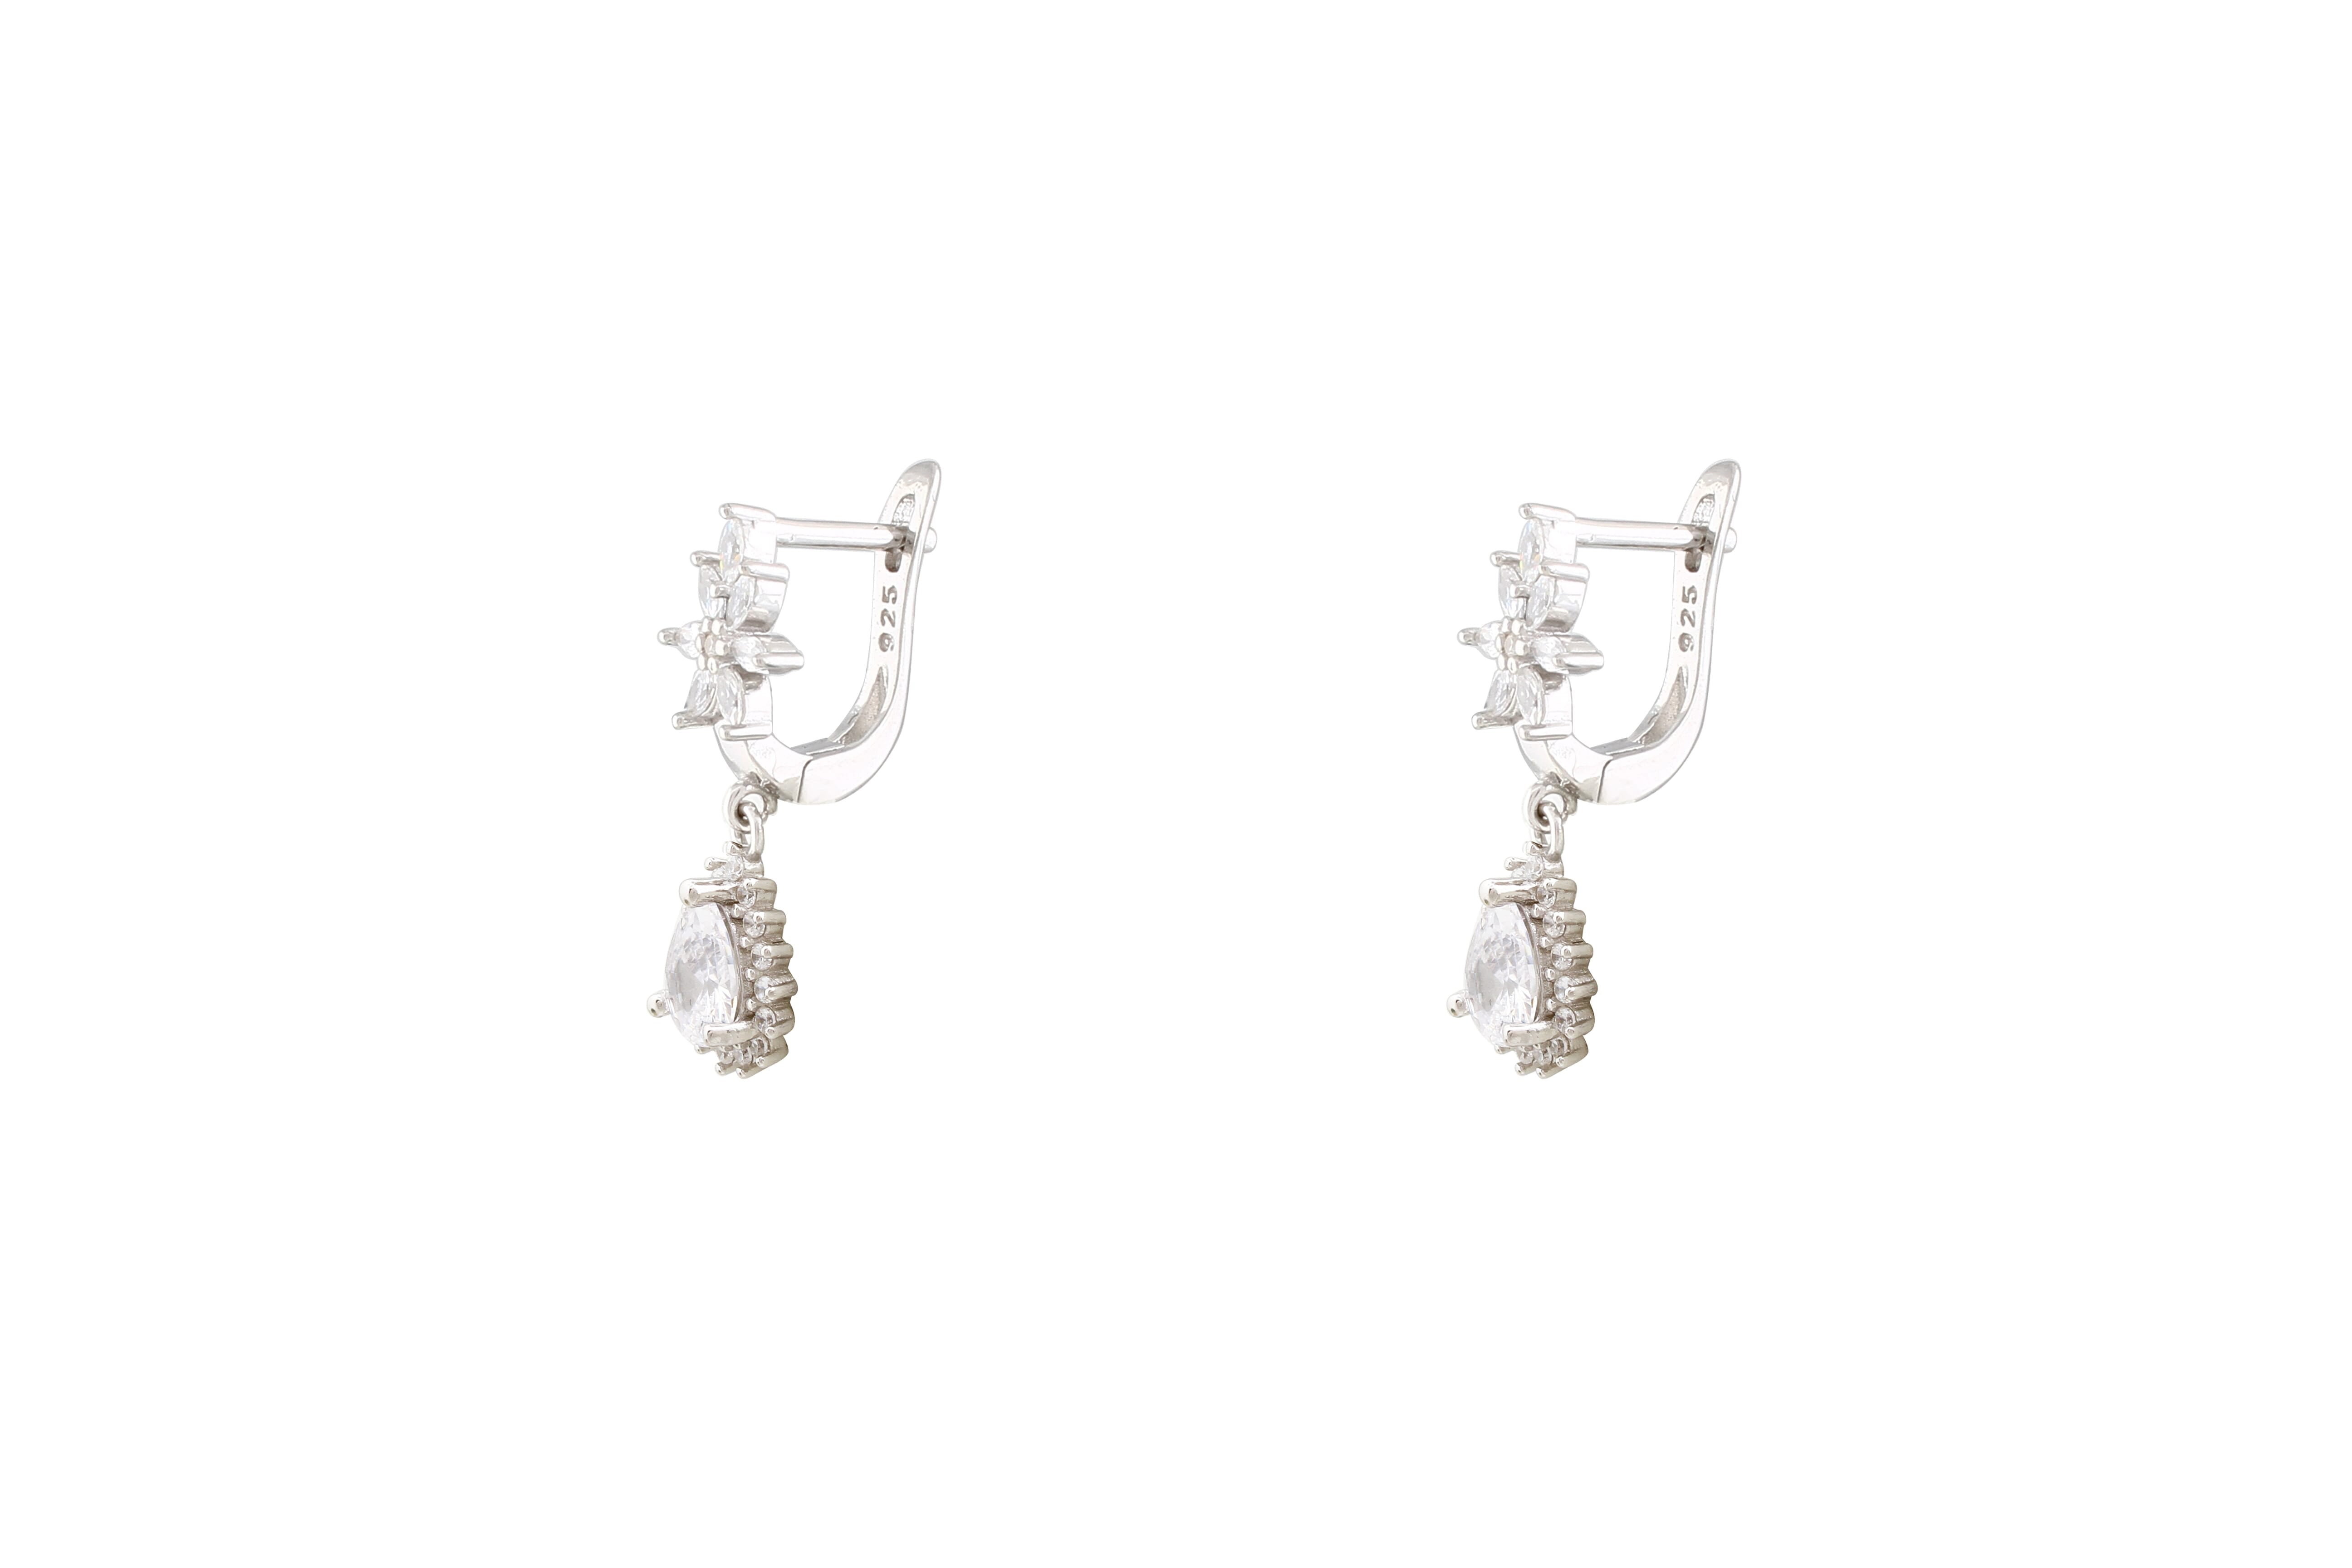 Asfour Crystal Drop Earrings Inlaid With Zircon Pear Stone In 925 Sterling Silver ER0436-W